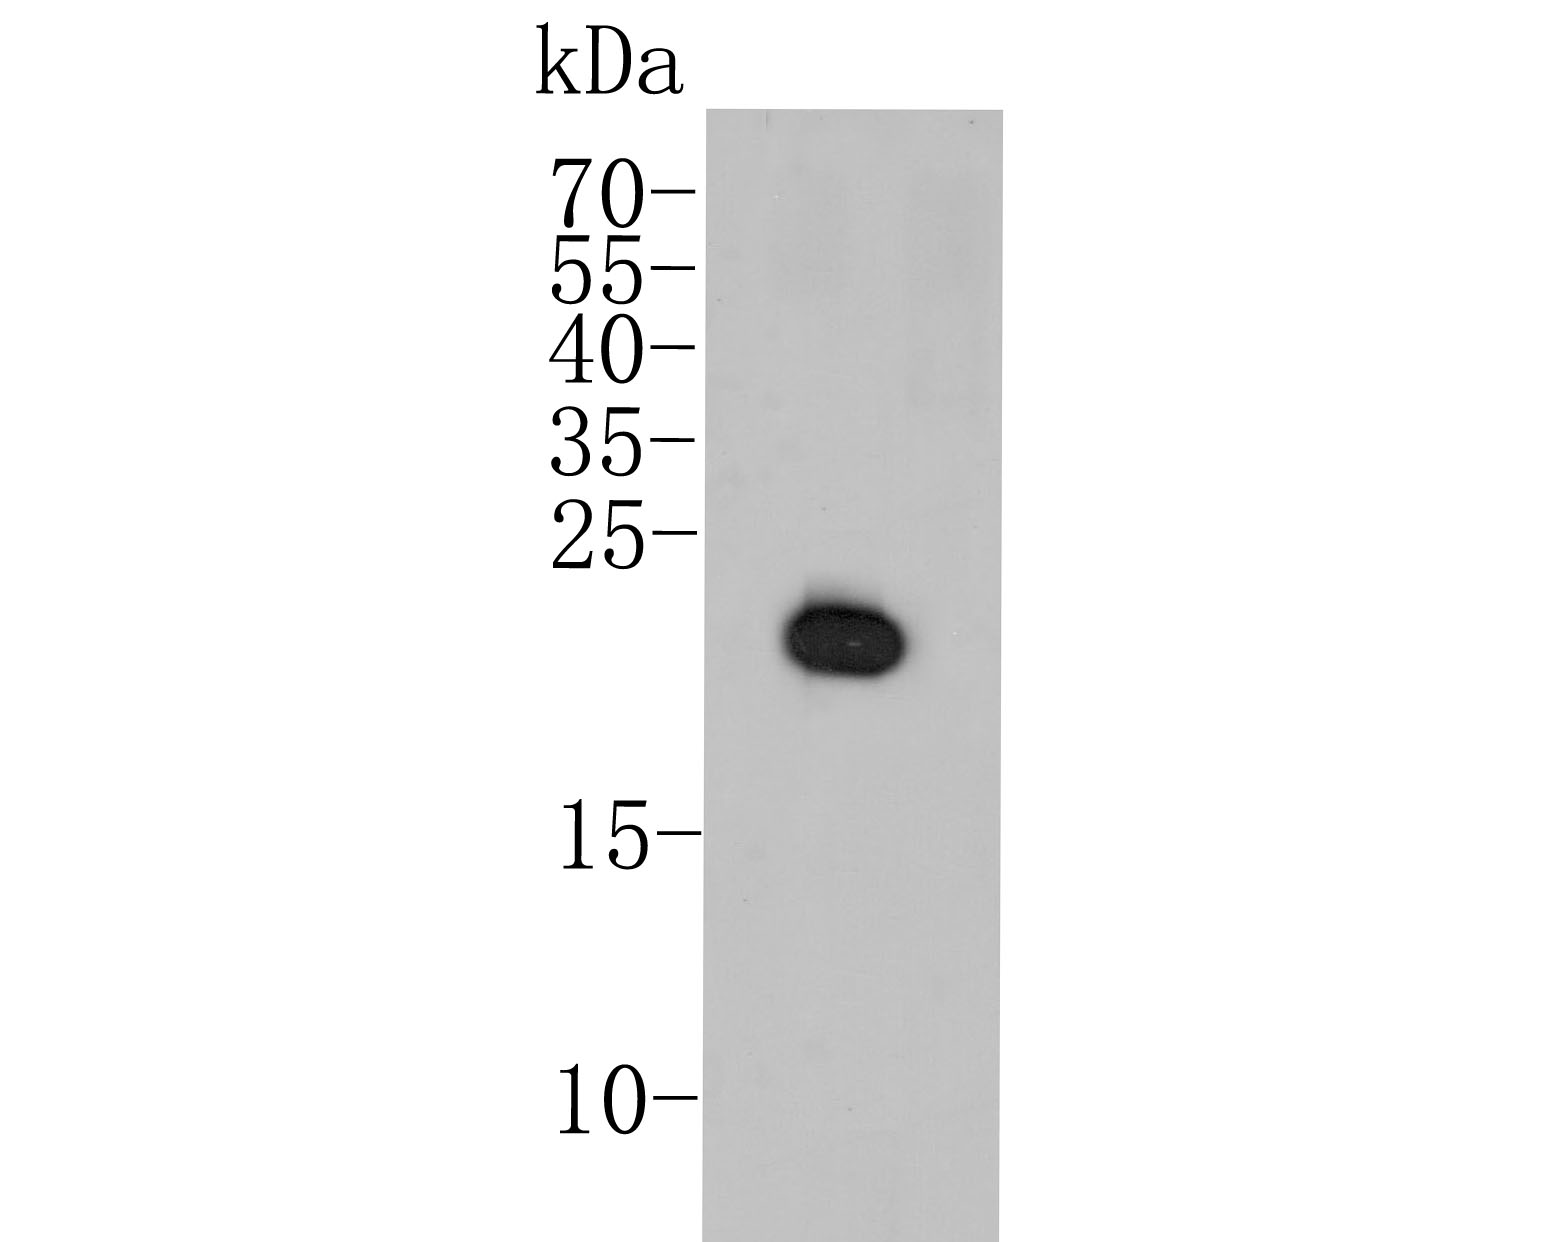 Western blot analysis of CDKN2A/p16INK4a on mouse brain tissue lysate. Proteins were transferred to a PVDF membrane and blocked with 5% BSA in PBS for 1 hour at room temperature. The primary antibody (ER2001-30, 1/500) was used in 5% BSA at room temperature for 2 hours. Goat Anti-Rabbit IgG - HRP Secondary Antibody (HA1001) at 1:5,000 dilution was used for 1 hour at room temperature.